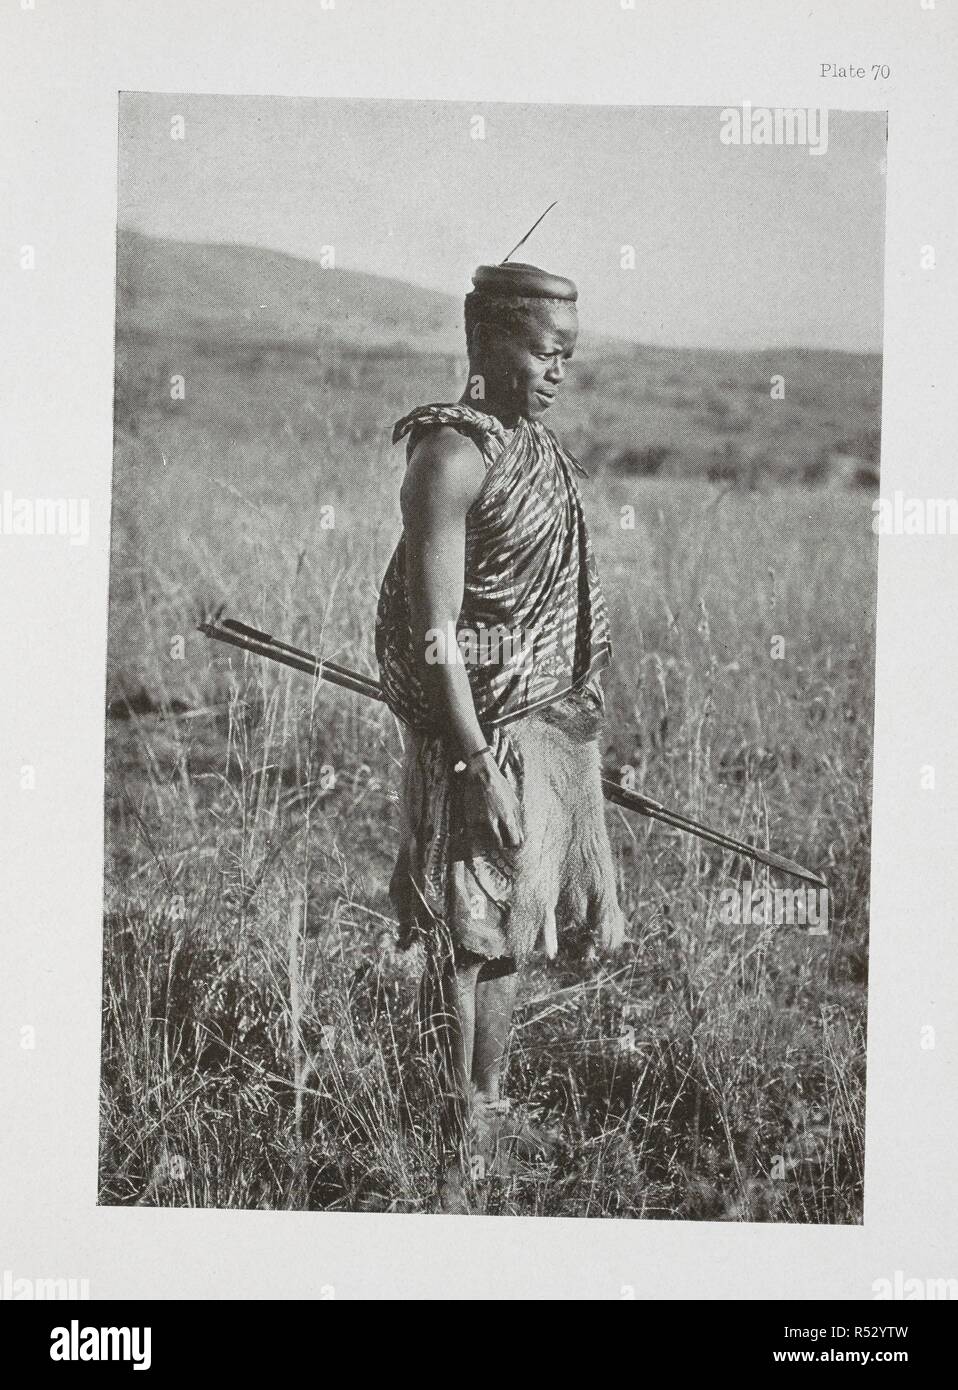 A Swazie warrior. The Essential Kafir ... With one hundred full-page illustrations by the author. London : Adam & Charles Black, 1904. Source: 10096.h.20 plate 70. Author: Kidd, Dudley. Stock Photo